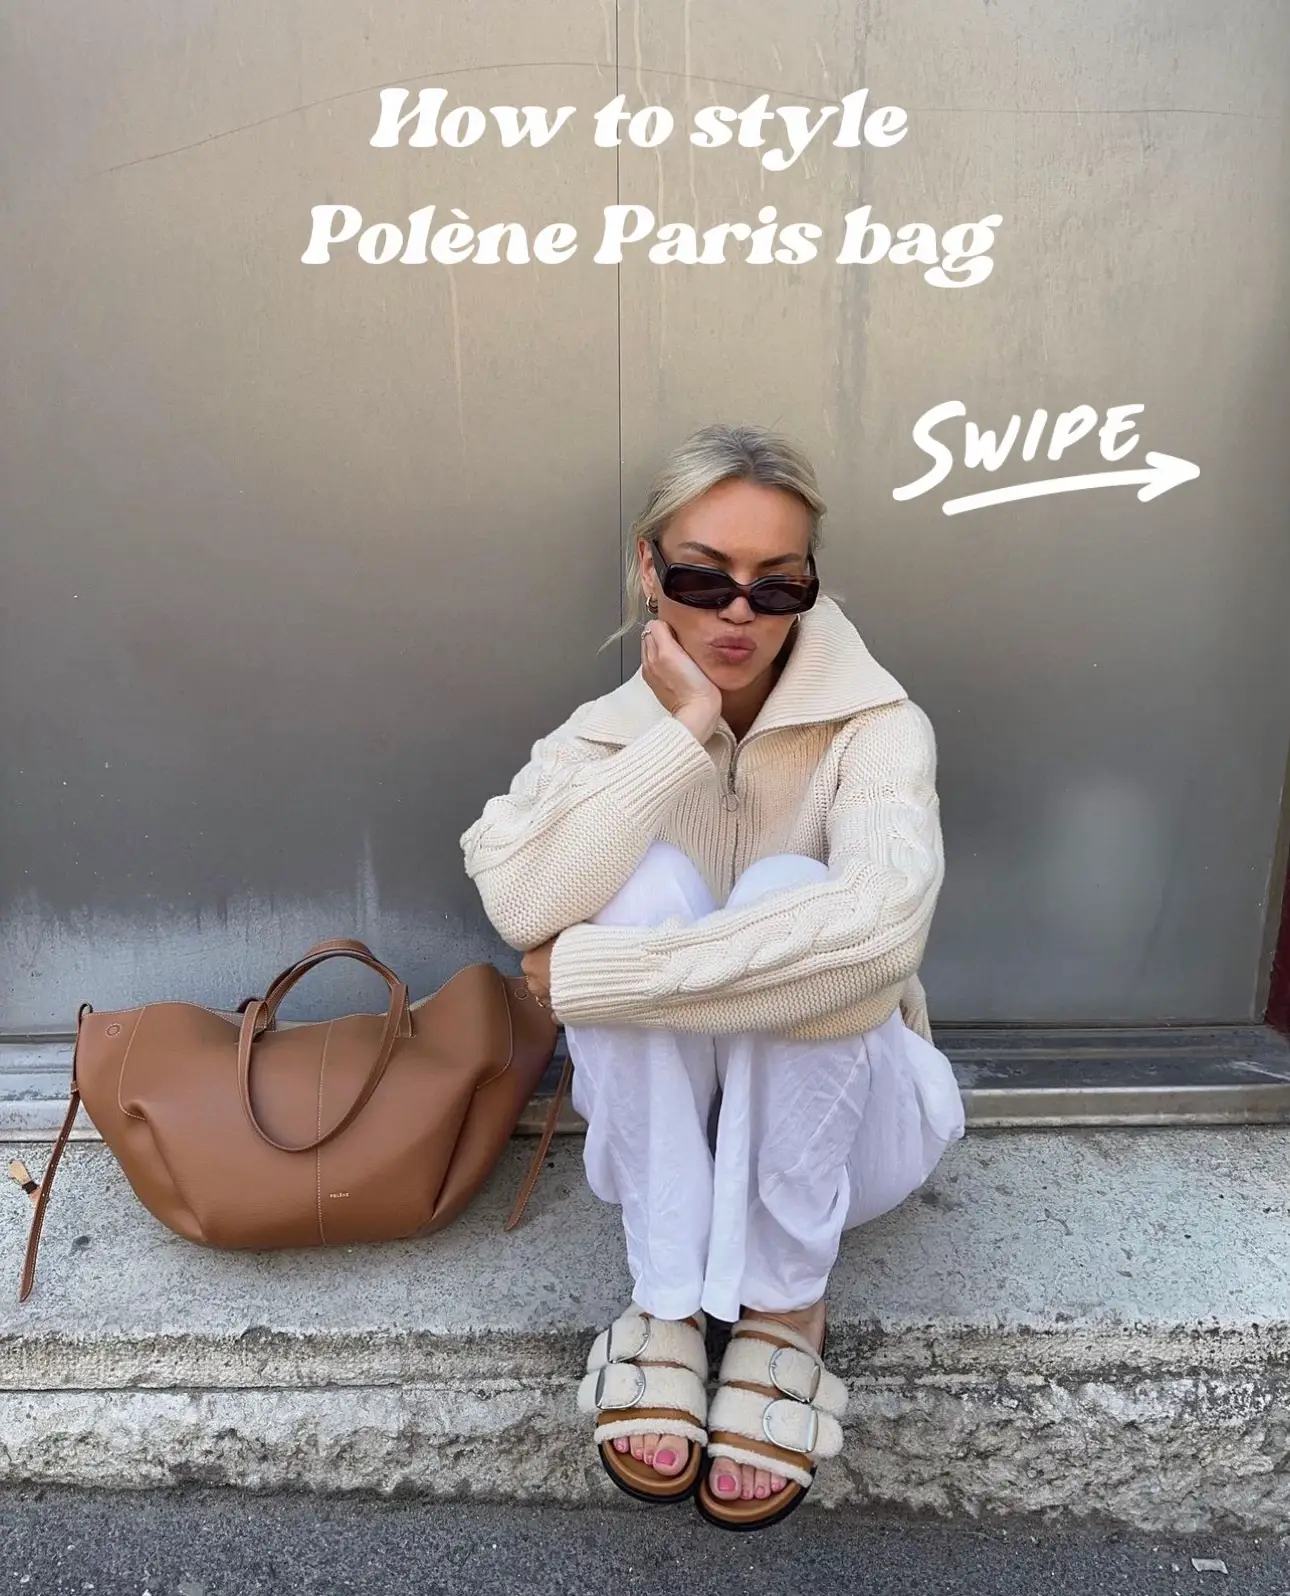 Polene Cyme Mini - Sold out when I was in Paris,so I ordered online : r/ handbags